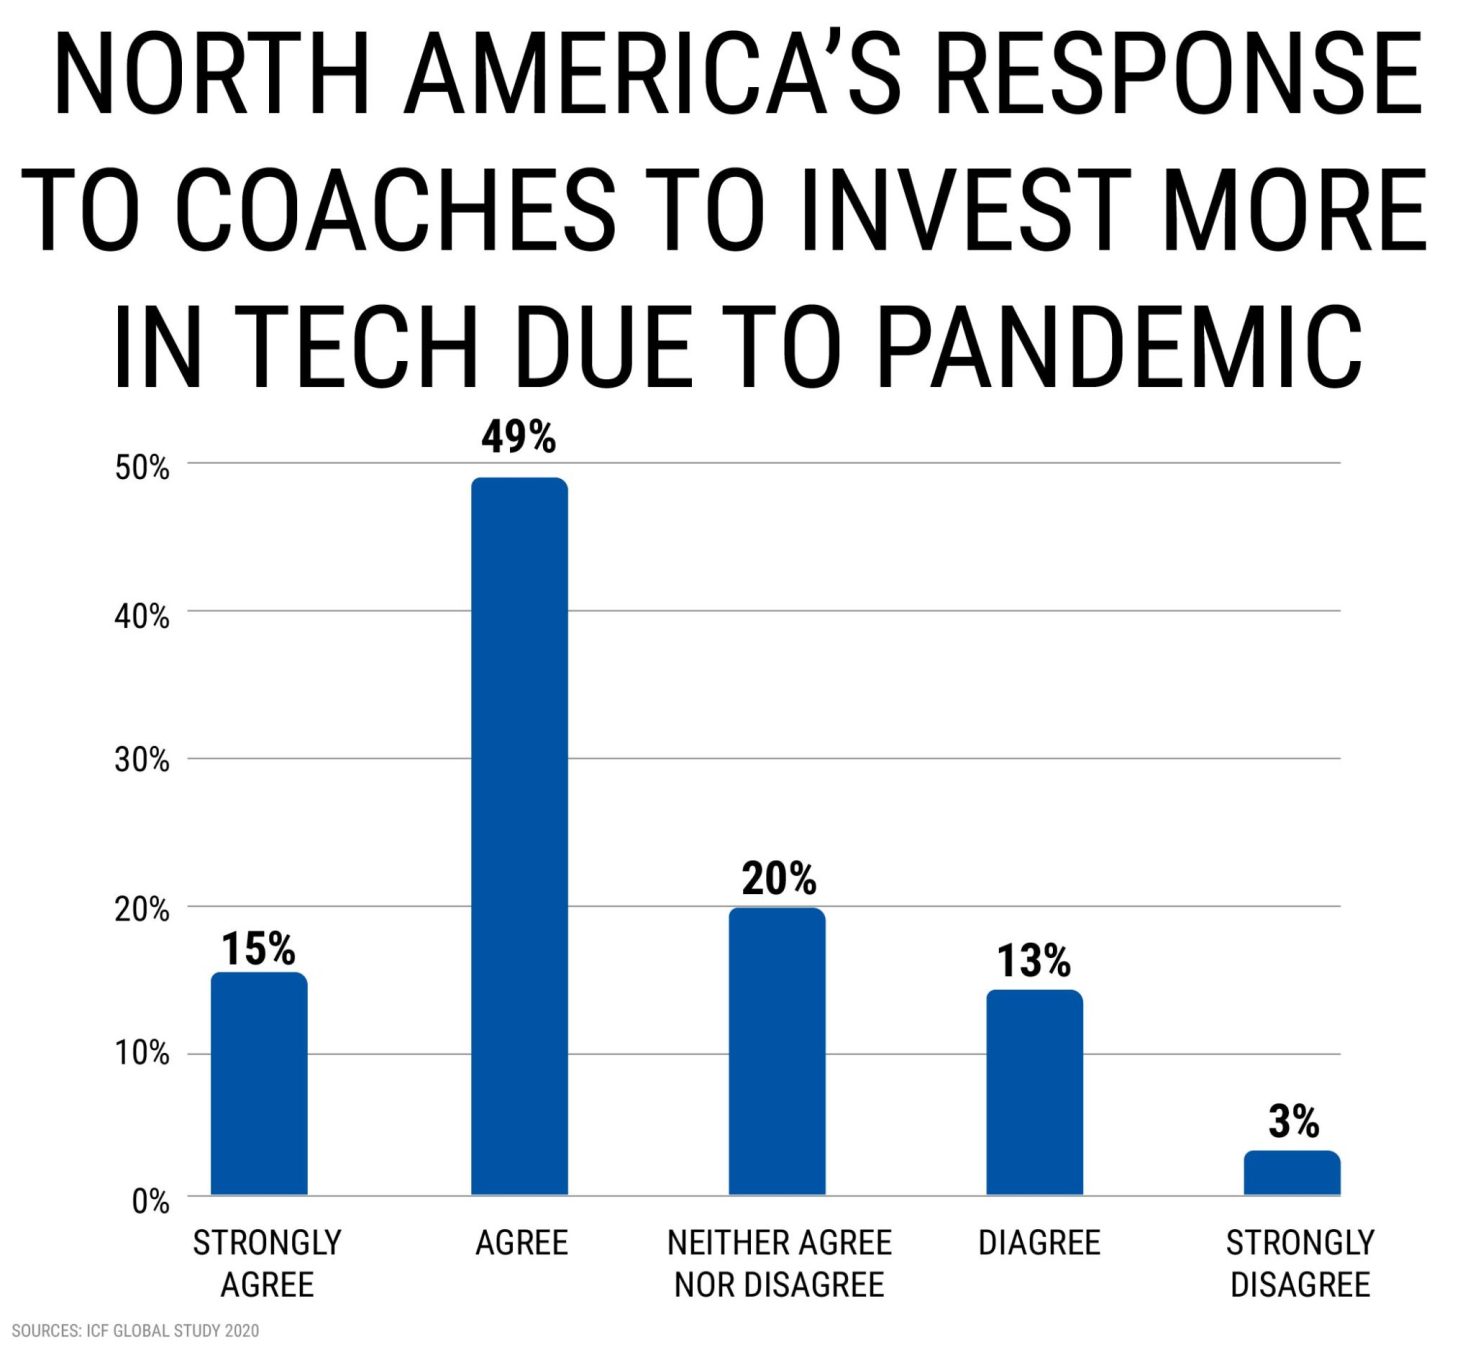 COACHES INVESTMENT IN TECH DUE TO PANDEMIC